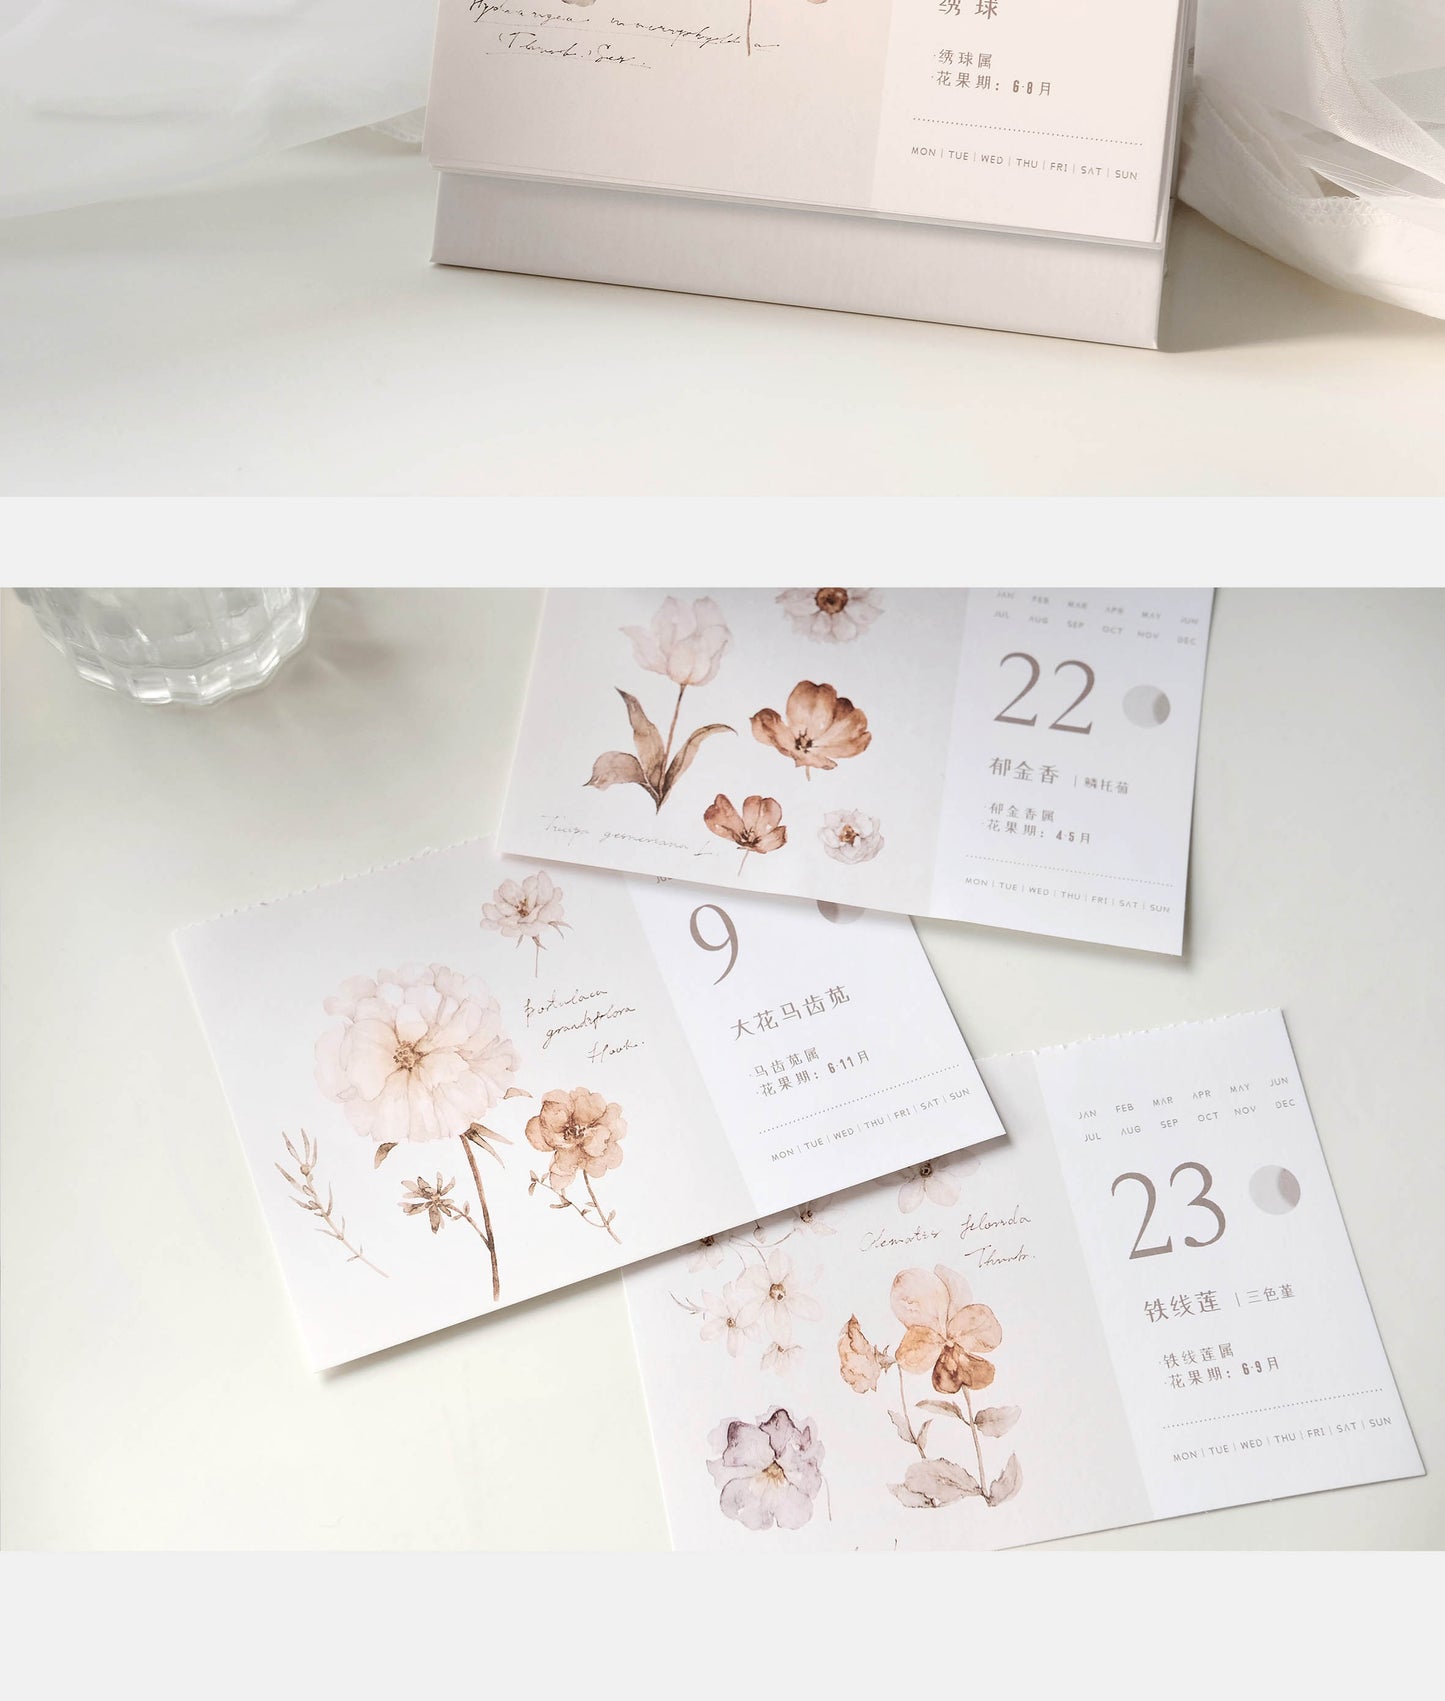 Freckles Tea Vol. 3 Pure White Botanical Calendar (Undated, 31 Perforated Sheets)